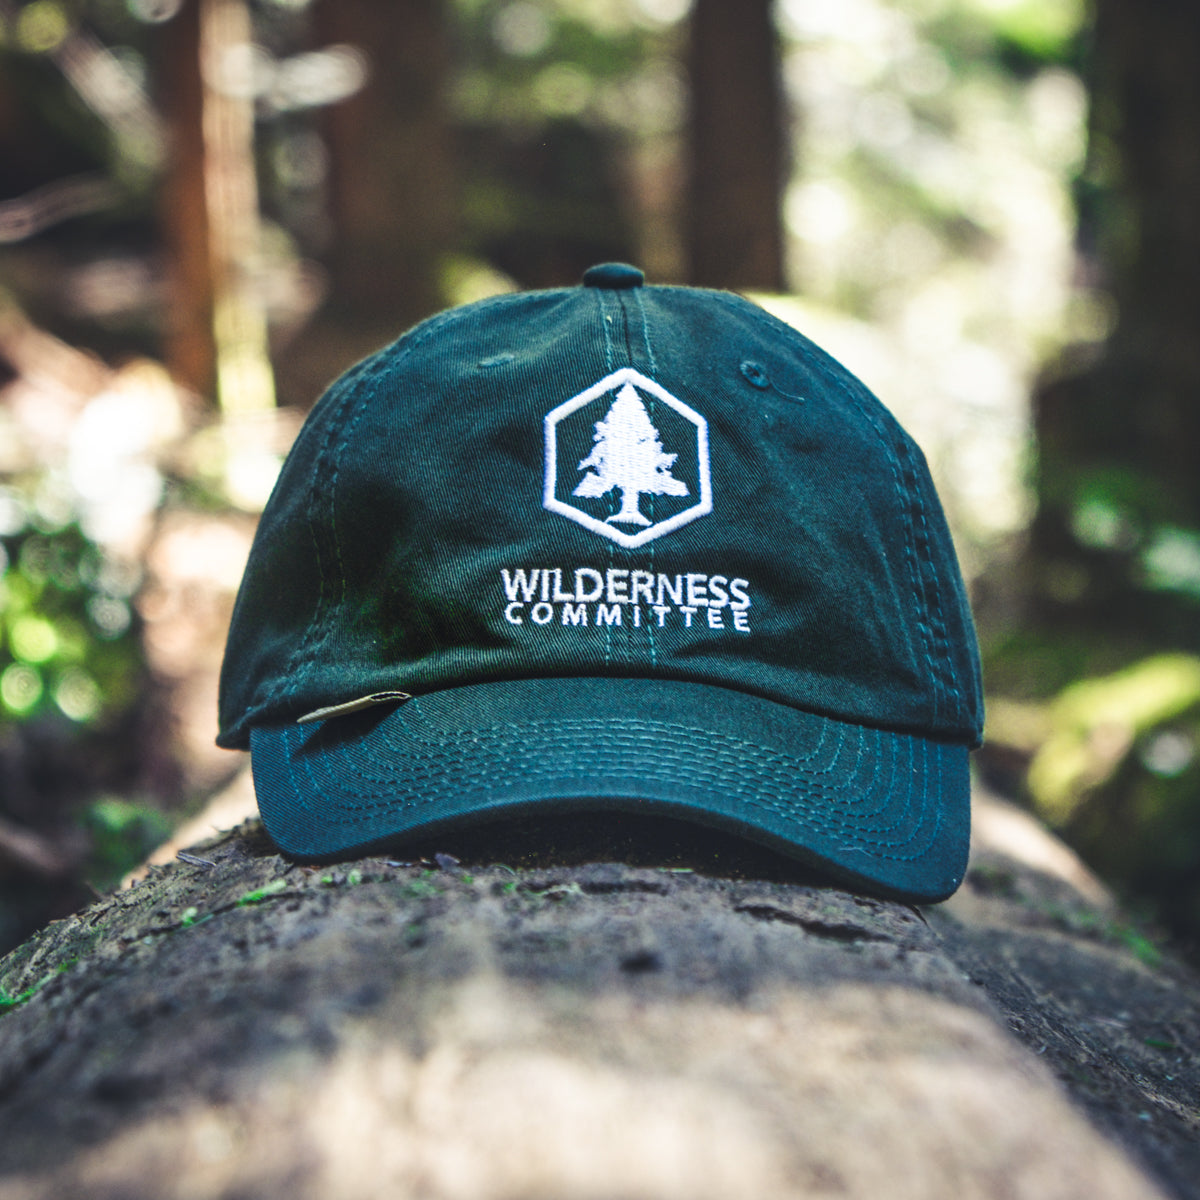 A hat with the Wilderness Committee logo on it, resting on a log. End of image description.